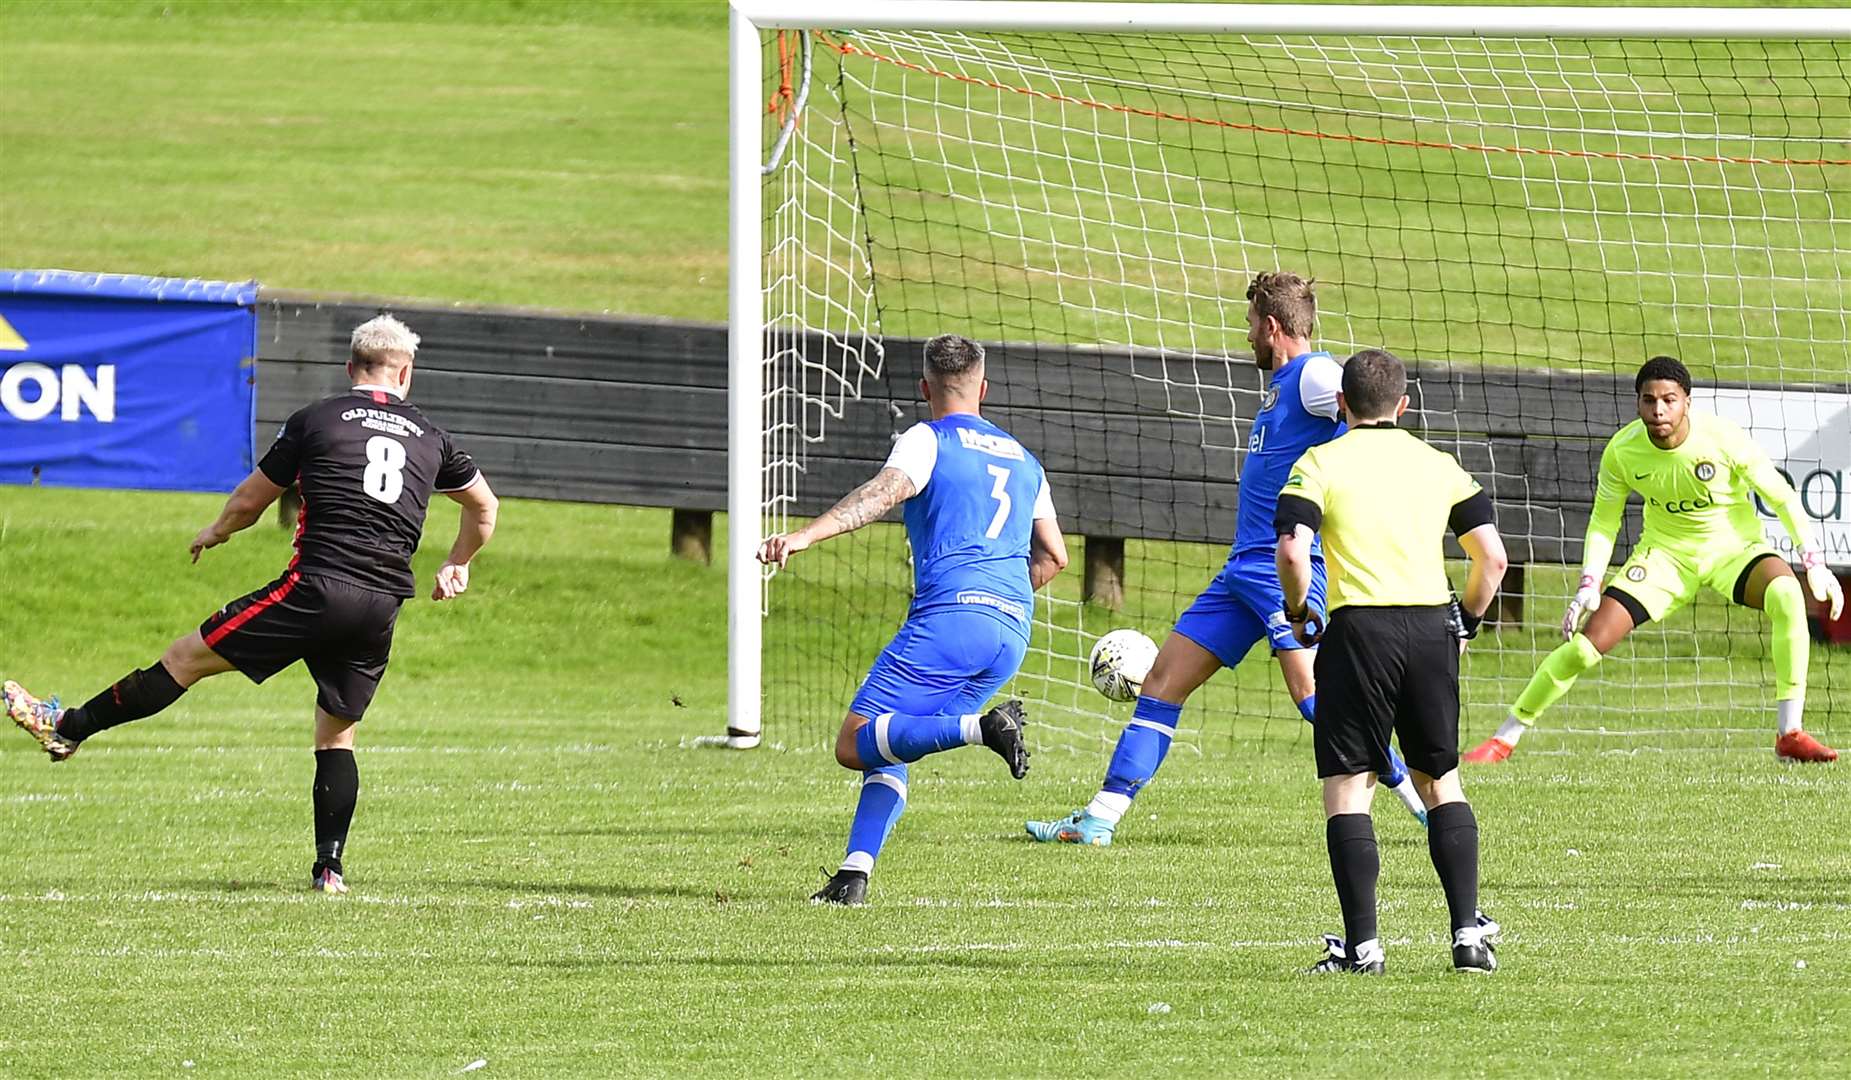 Jack Halliday fires the ball past Lochee keeper Mitchel Da Costa Tristan to bring Wick level after they had gone a goal down. The Scorries went on to score five. Picture: Mel Roger